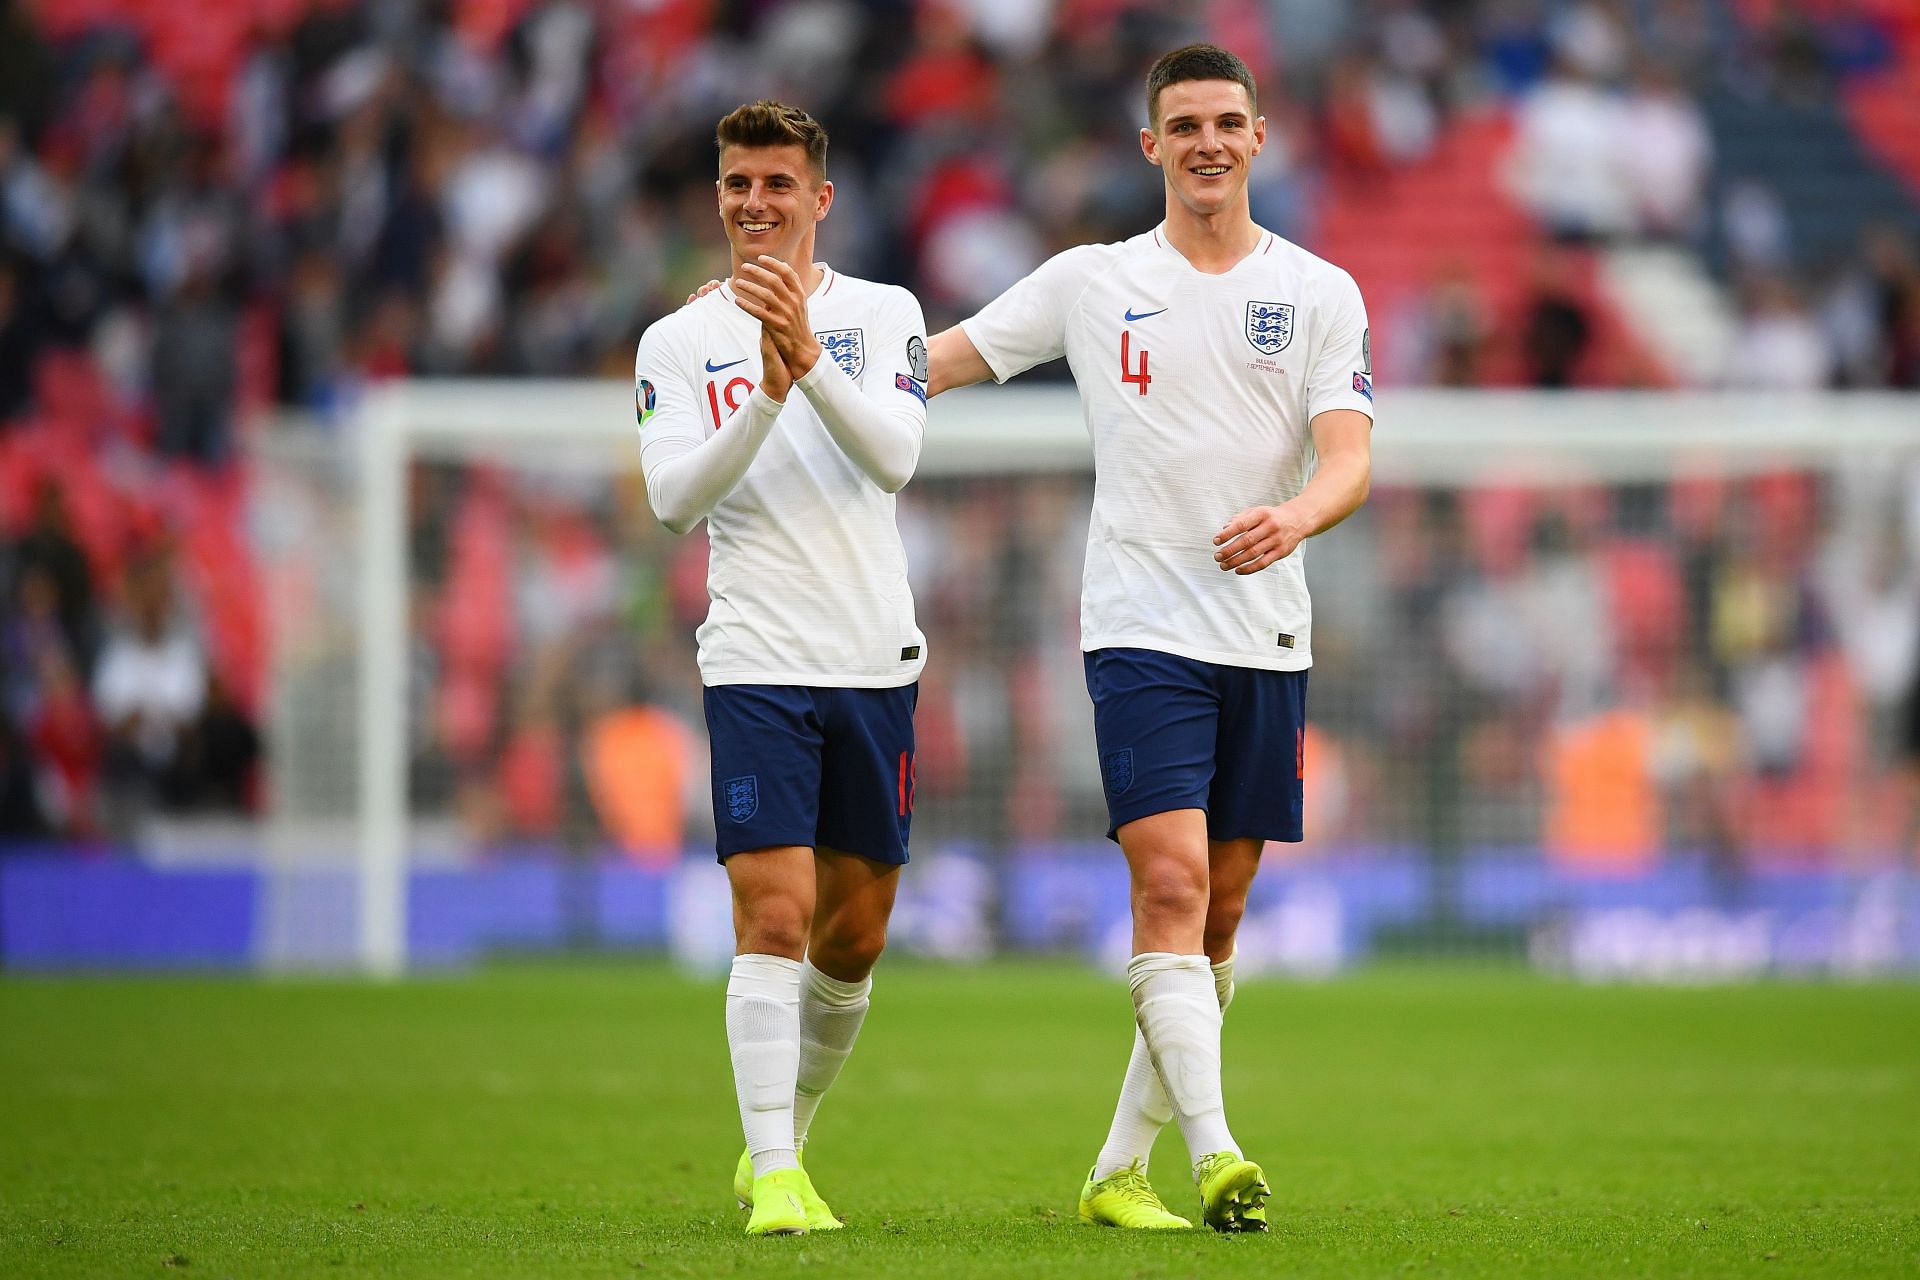 Manchester United want Mason Mount (left) and Declan Rice.